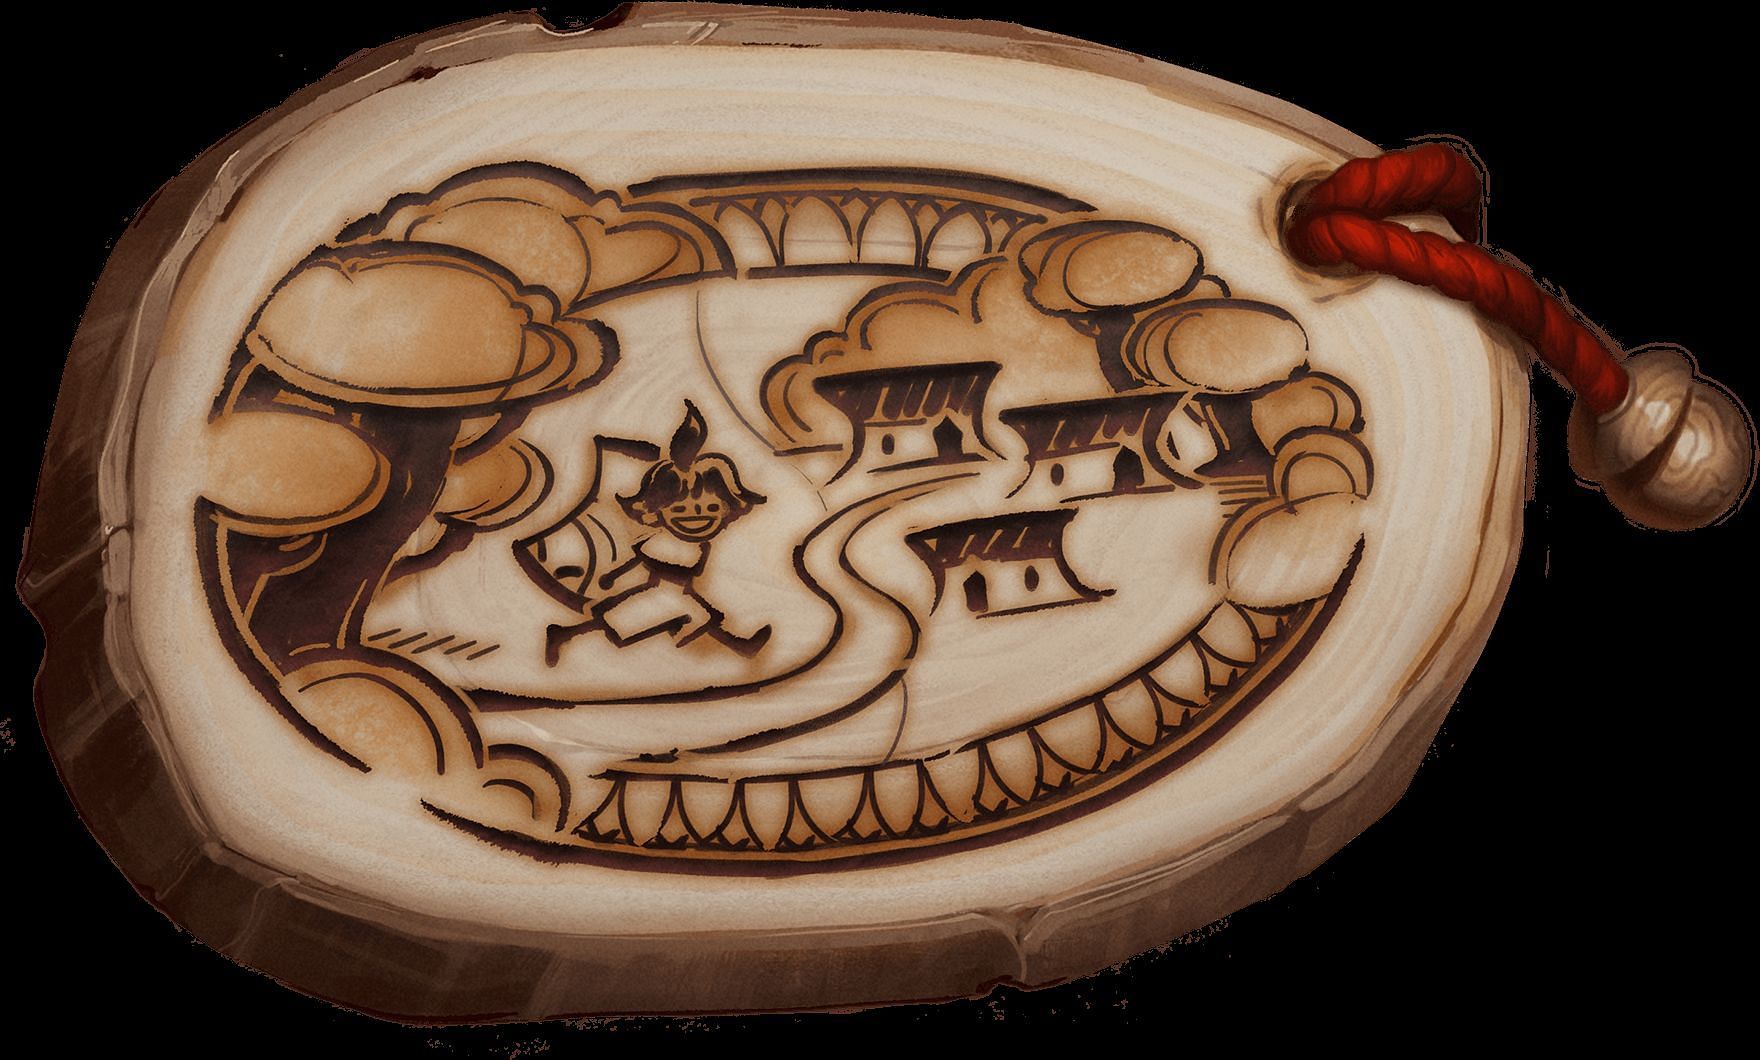 The first visual letter of Milio, depicted in a wooden piece (Image via Riot Games - League of Legends)